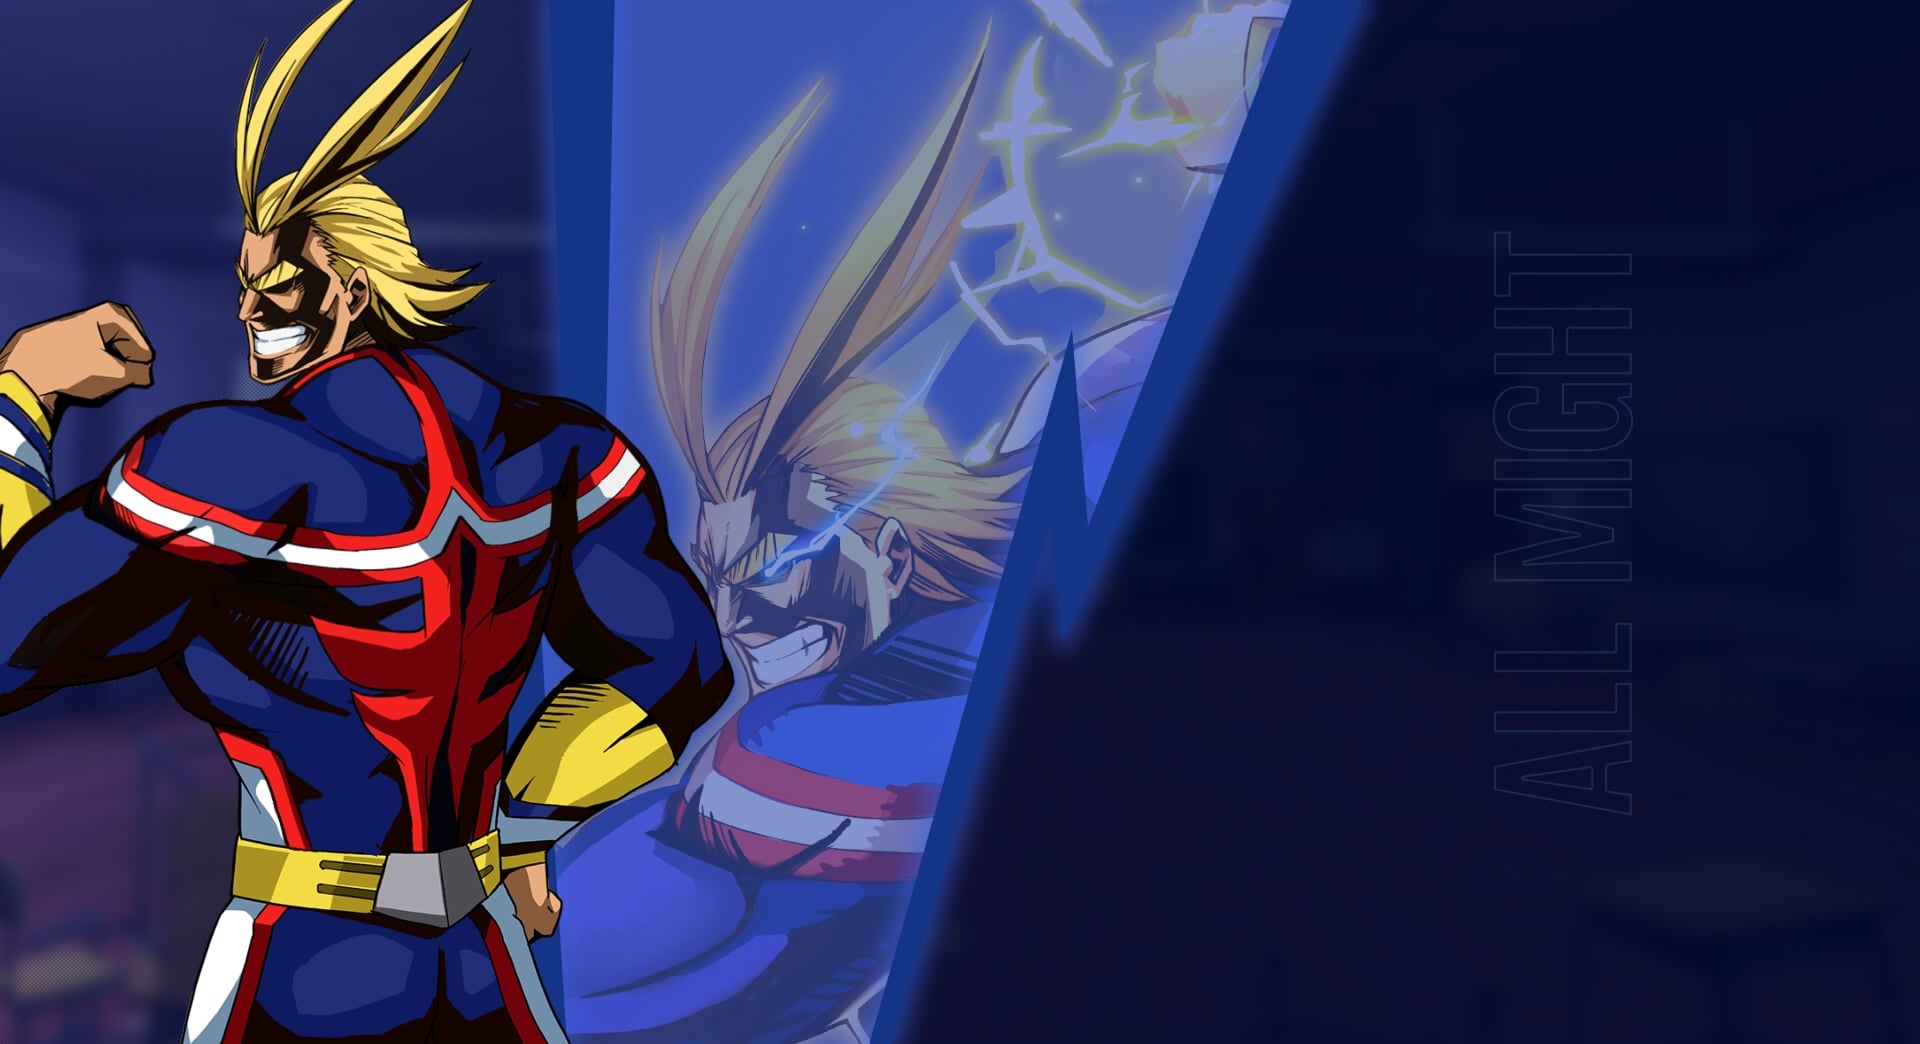 My Hero Academia: The Strongest Hero character. All Might